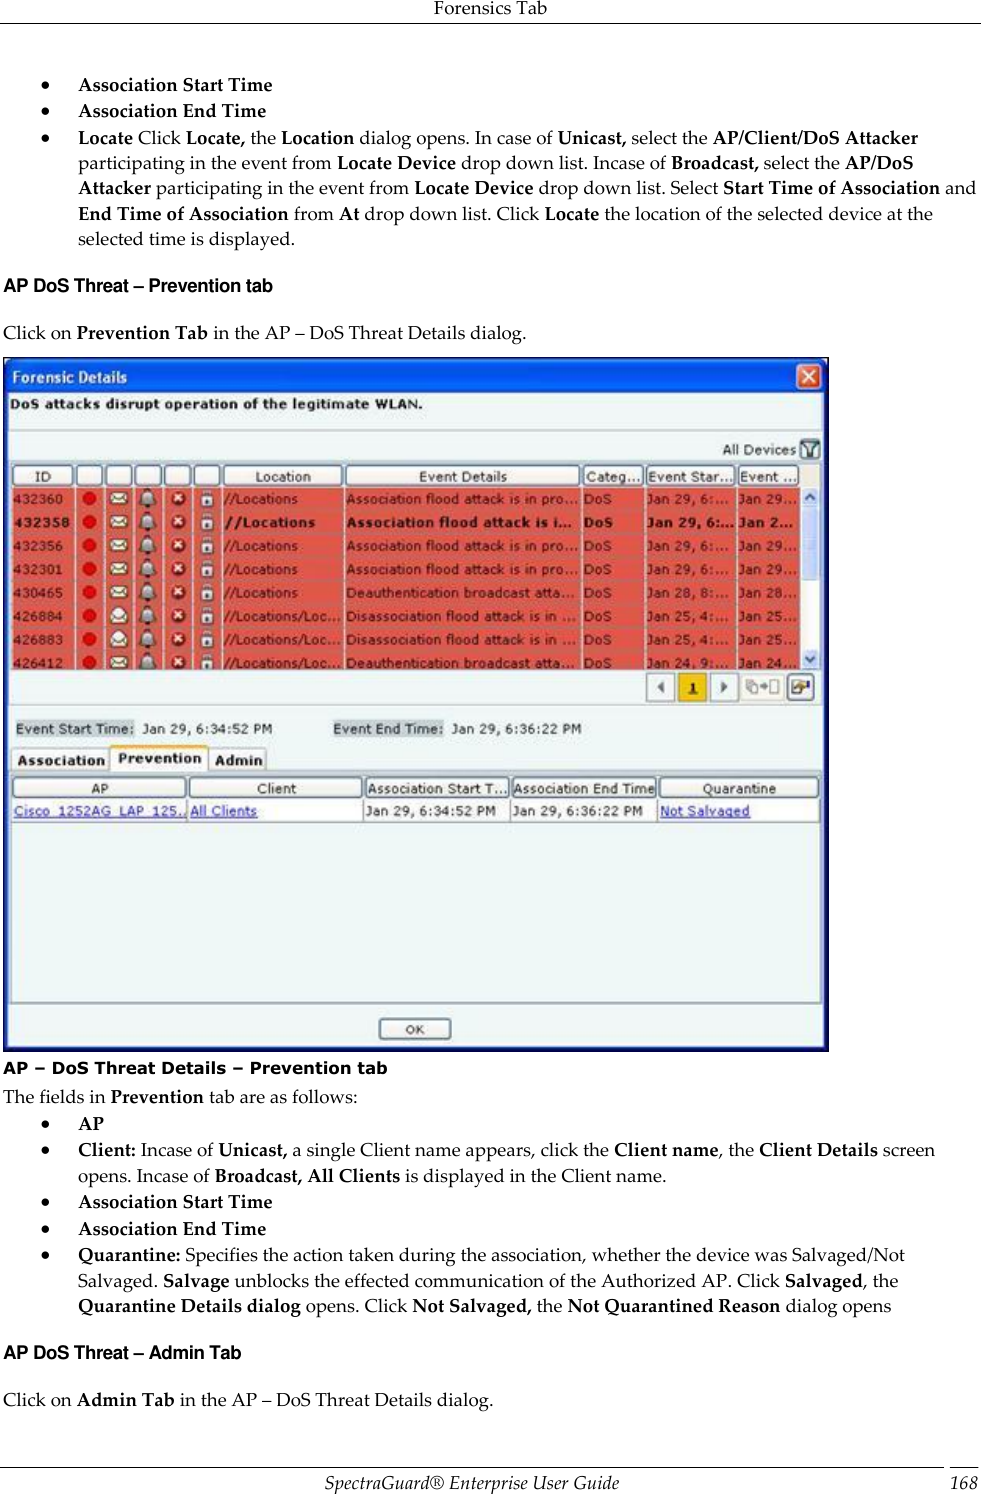 Forensics Tab SpectraGuard®  Enterprise User Guide 168  Association Start Time  Association End Time  Locate Click Locate, the Location dialog opens. In case of Unicast, select the AP/Client/DoS Attacker participating in the event from Locate Device drop down list. Incase of Broadcast, select the AP/DoS Attacker participating in the event from Locate Device drop down list. Select Start Time of Association and End Time of Association from At drop down list. Click Locate the location of the selected device at the selected time is displayed. AP DoS Threat – Prevention tab Click on Prevention Tab in the AP – DoS Threat Details dialog.  AP – DoS Threat Details – Prevention tab The fields in Prevention tab are as follows:  AP  Client: Incase of Unicast, a single Client name appears, click the Client name, the Client Details screen opens. Incase of Broadcast, All Clients is displayed in the Client name.  Association Start Time  Association End Time  Quarantine: Specifies the action taken during the association, whether the device was Salvaged/Not Salvaged. Salvage unblocks the effected communication of the Authorized AP. Click Salvaged, the Quarantine Details dialog opens. Click Not Salvaged, the Not Quarantined Reason dialog opens AP DoS Threat – Admin Tab Click on Admin Tab in the AP – DoS Threat Details dialog. 